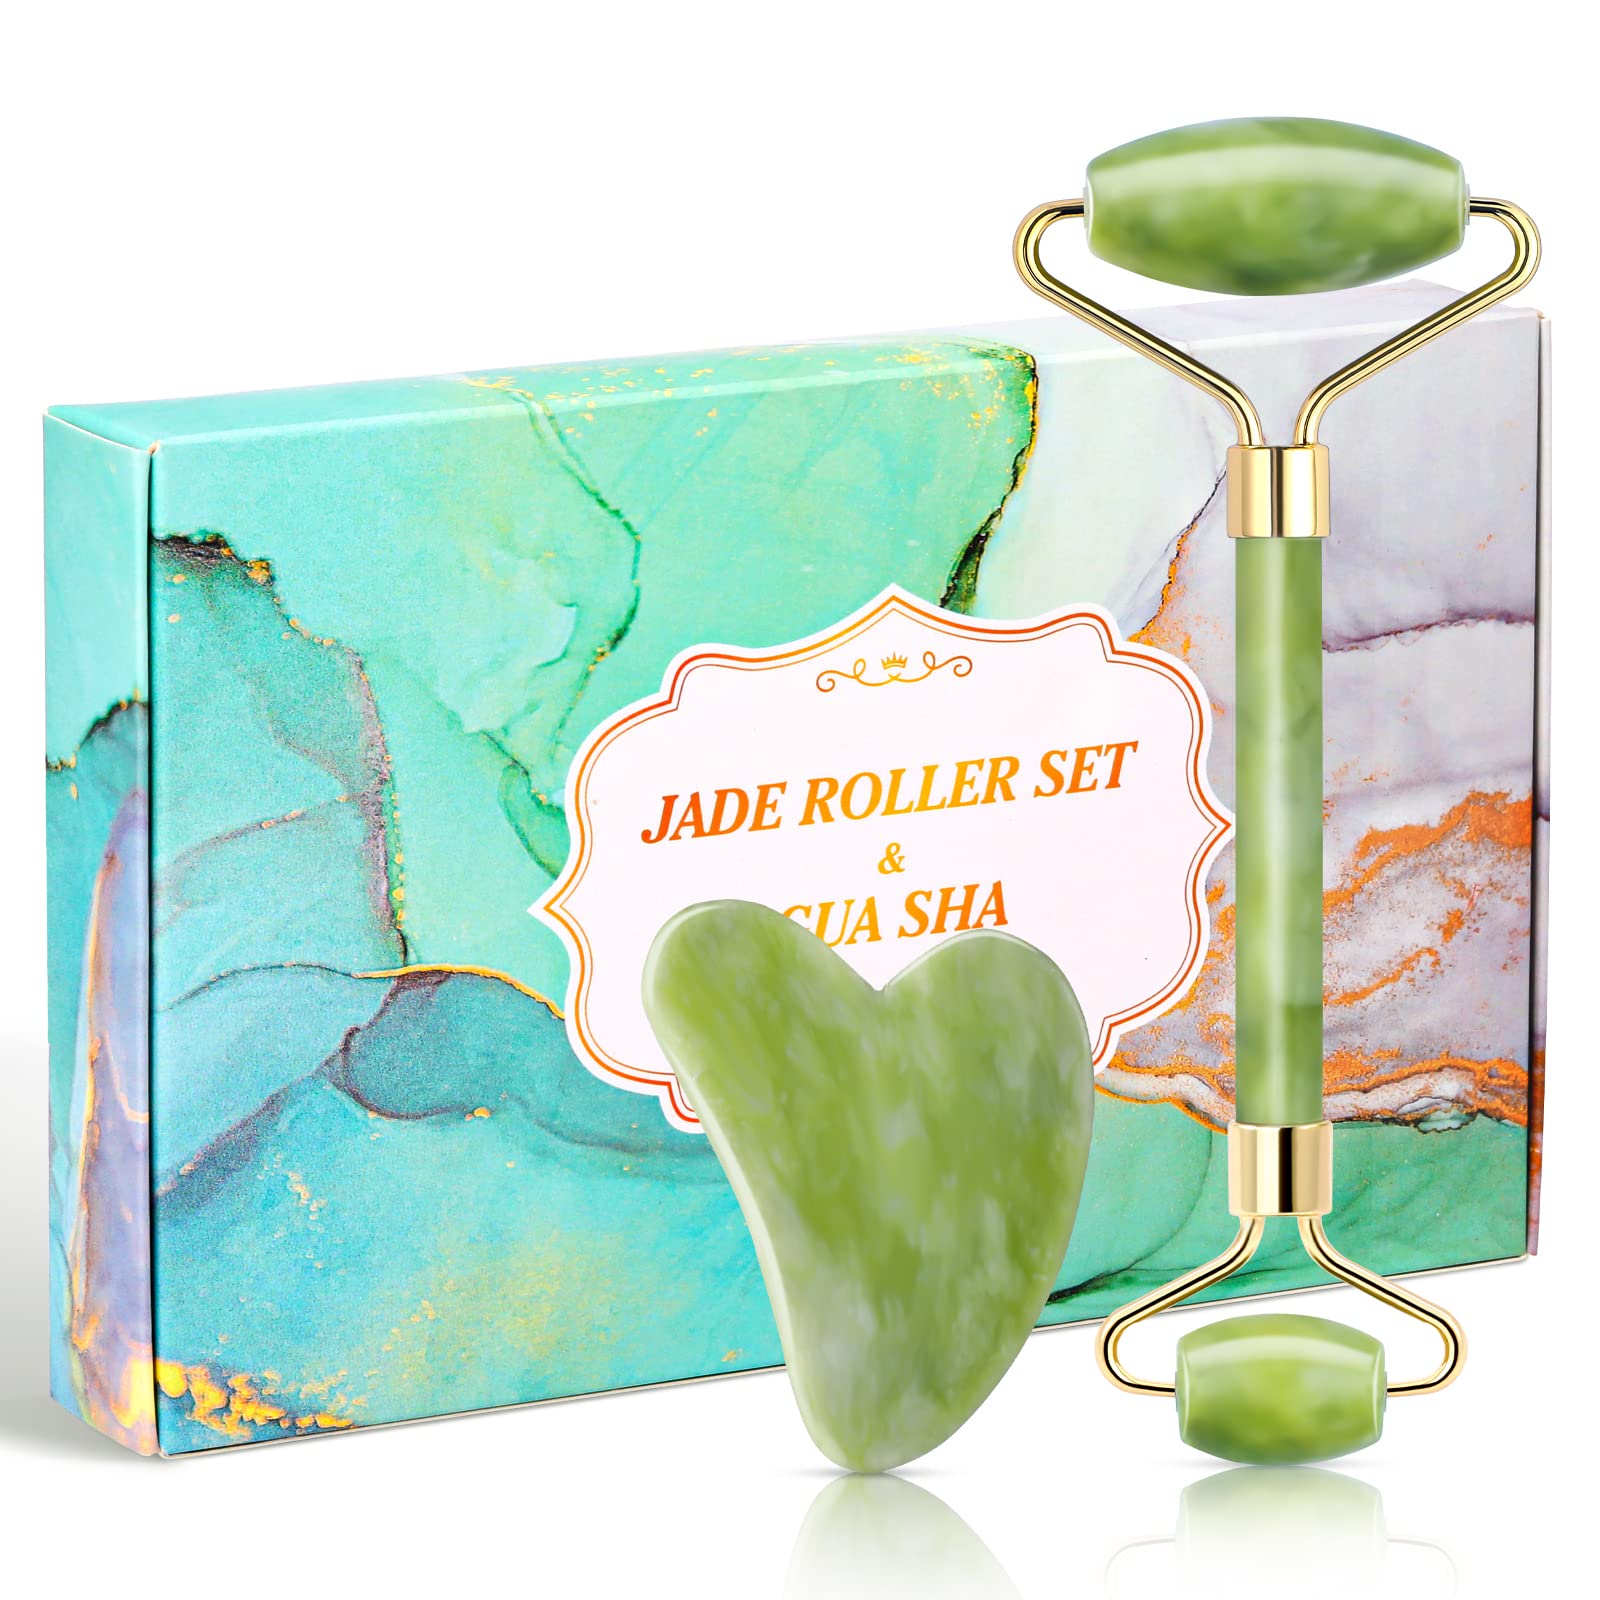 Jade Roller - Face Roller, Natural Gua Sha Massage Set for Eye Puffiness Treatment, Skin Tightening, Rejuvenates Face Skin and Diminishes Double Chin & Wrinkle, Green